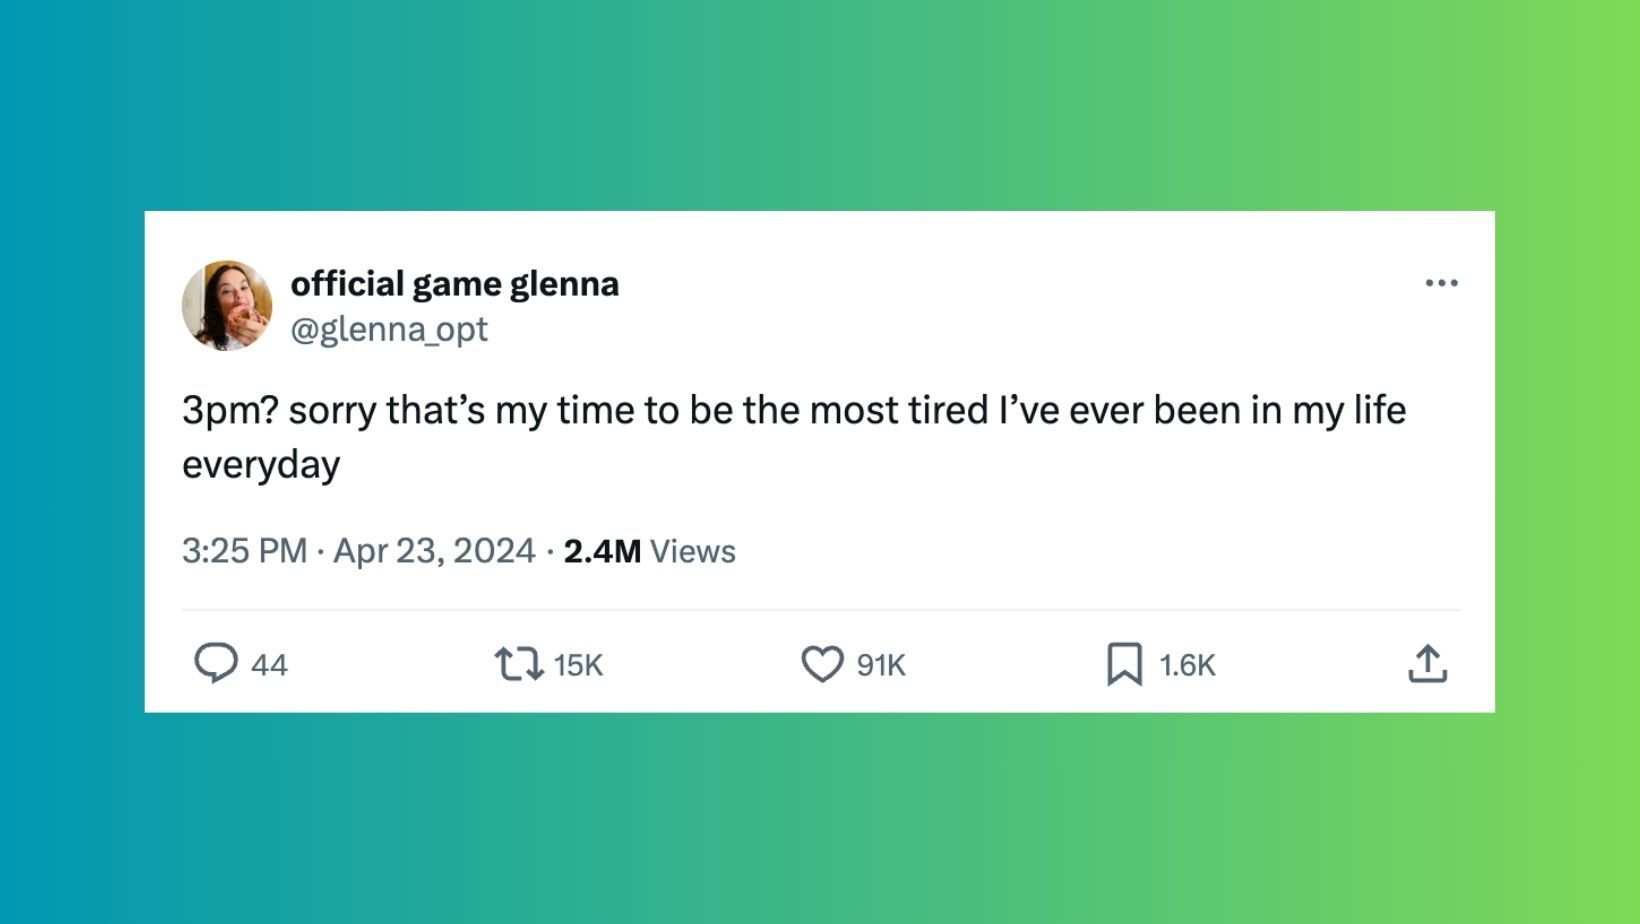 The Funniest Tweets From Women This Week (May 4-10)